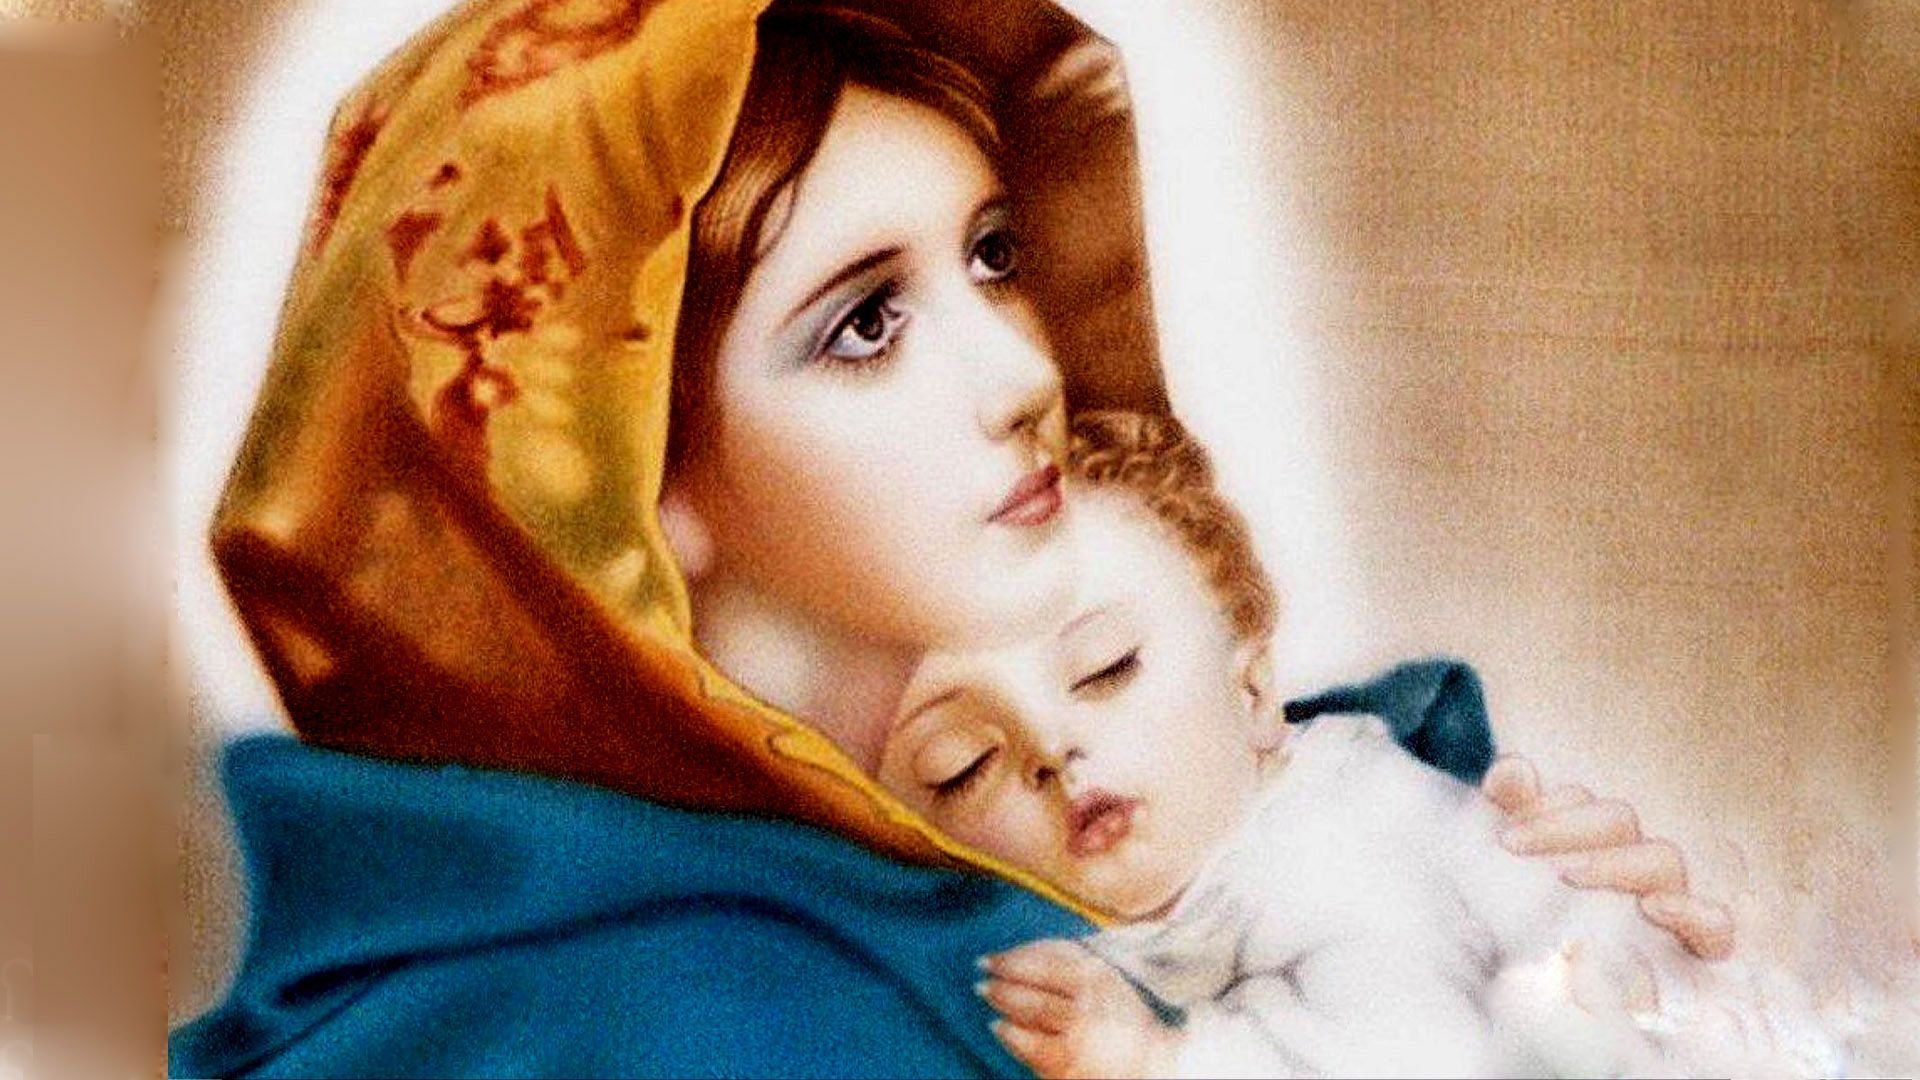 Christian Wallpaper, Mother Mary. Mother mary picture, Mother mary, Mary jesus mother